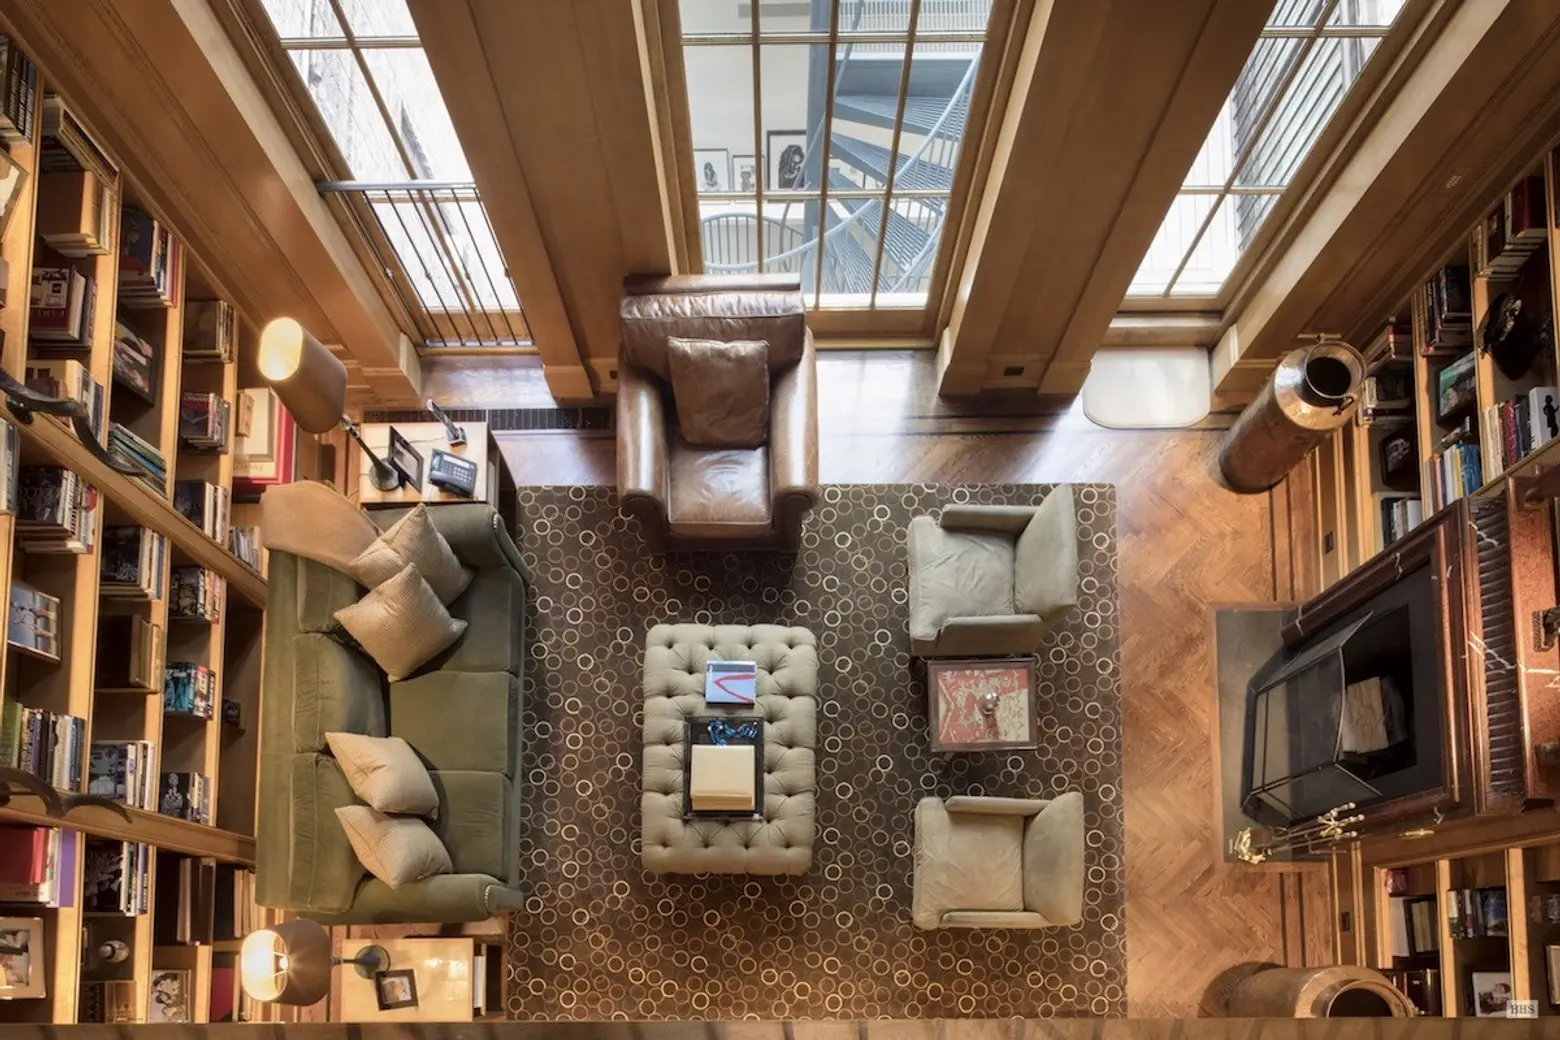 On the market since 2009, this $36.5M Upper East Side mansion has just ...